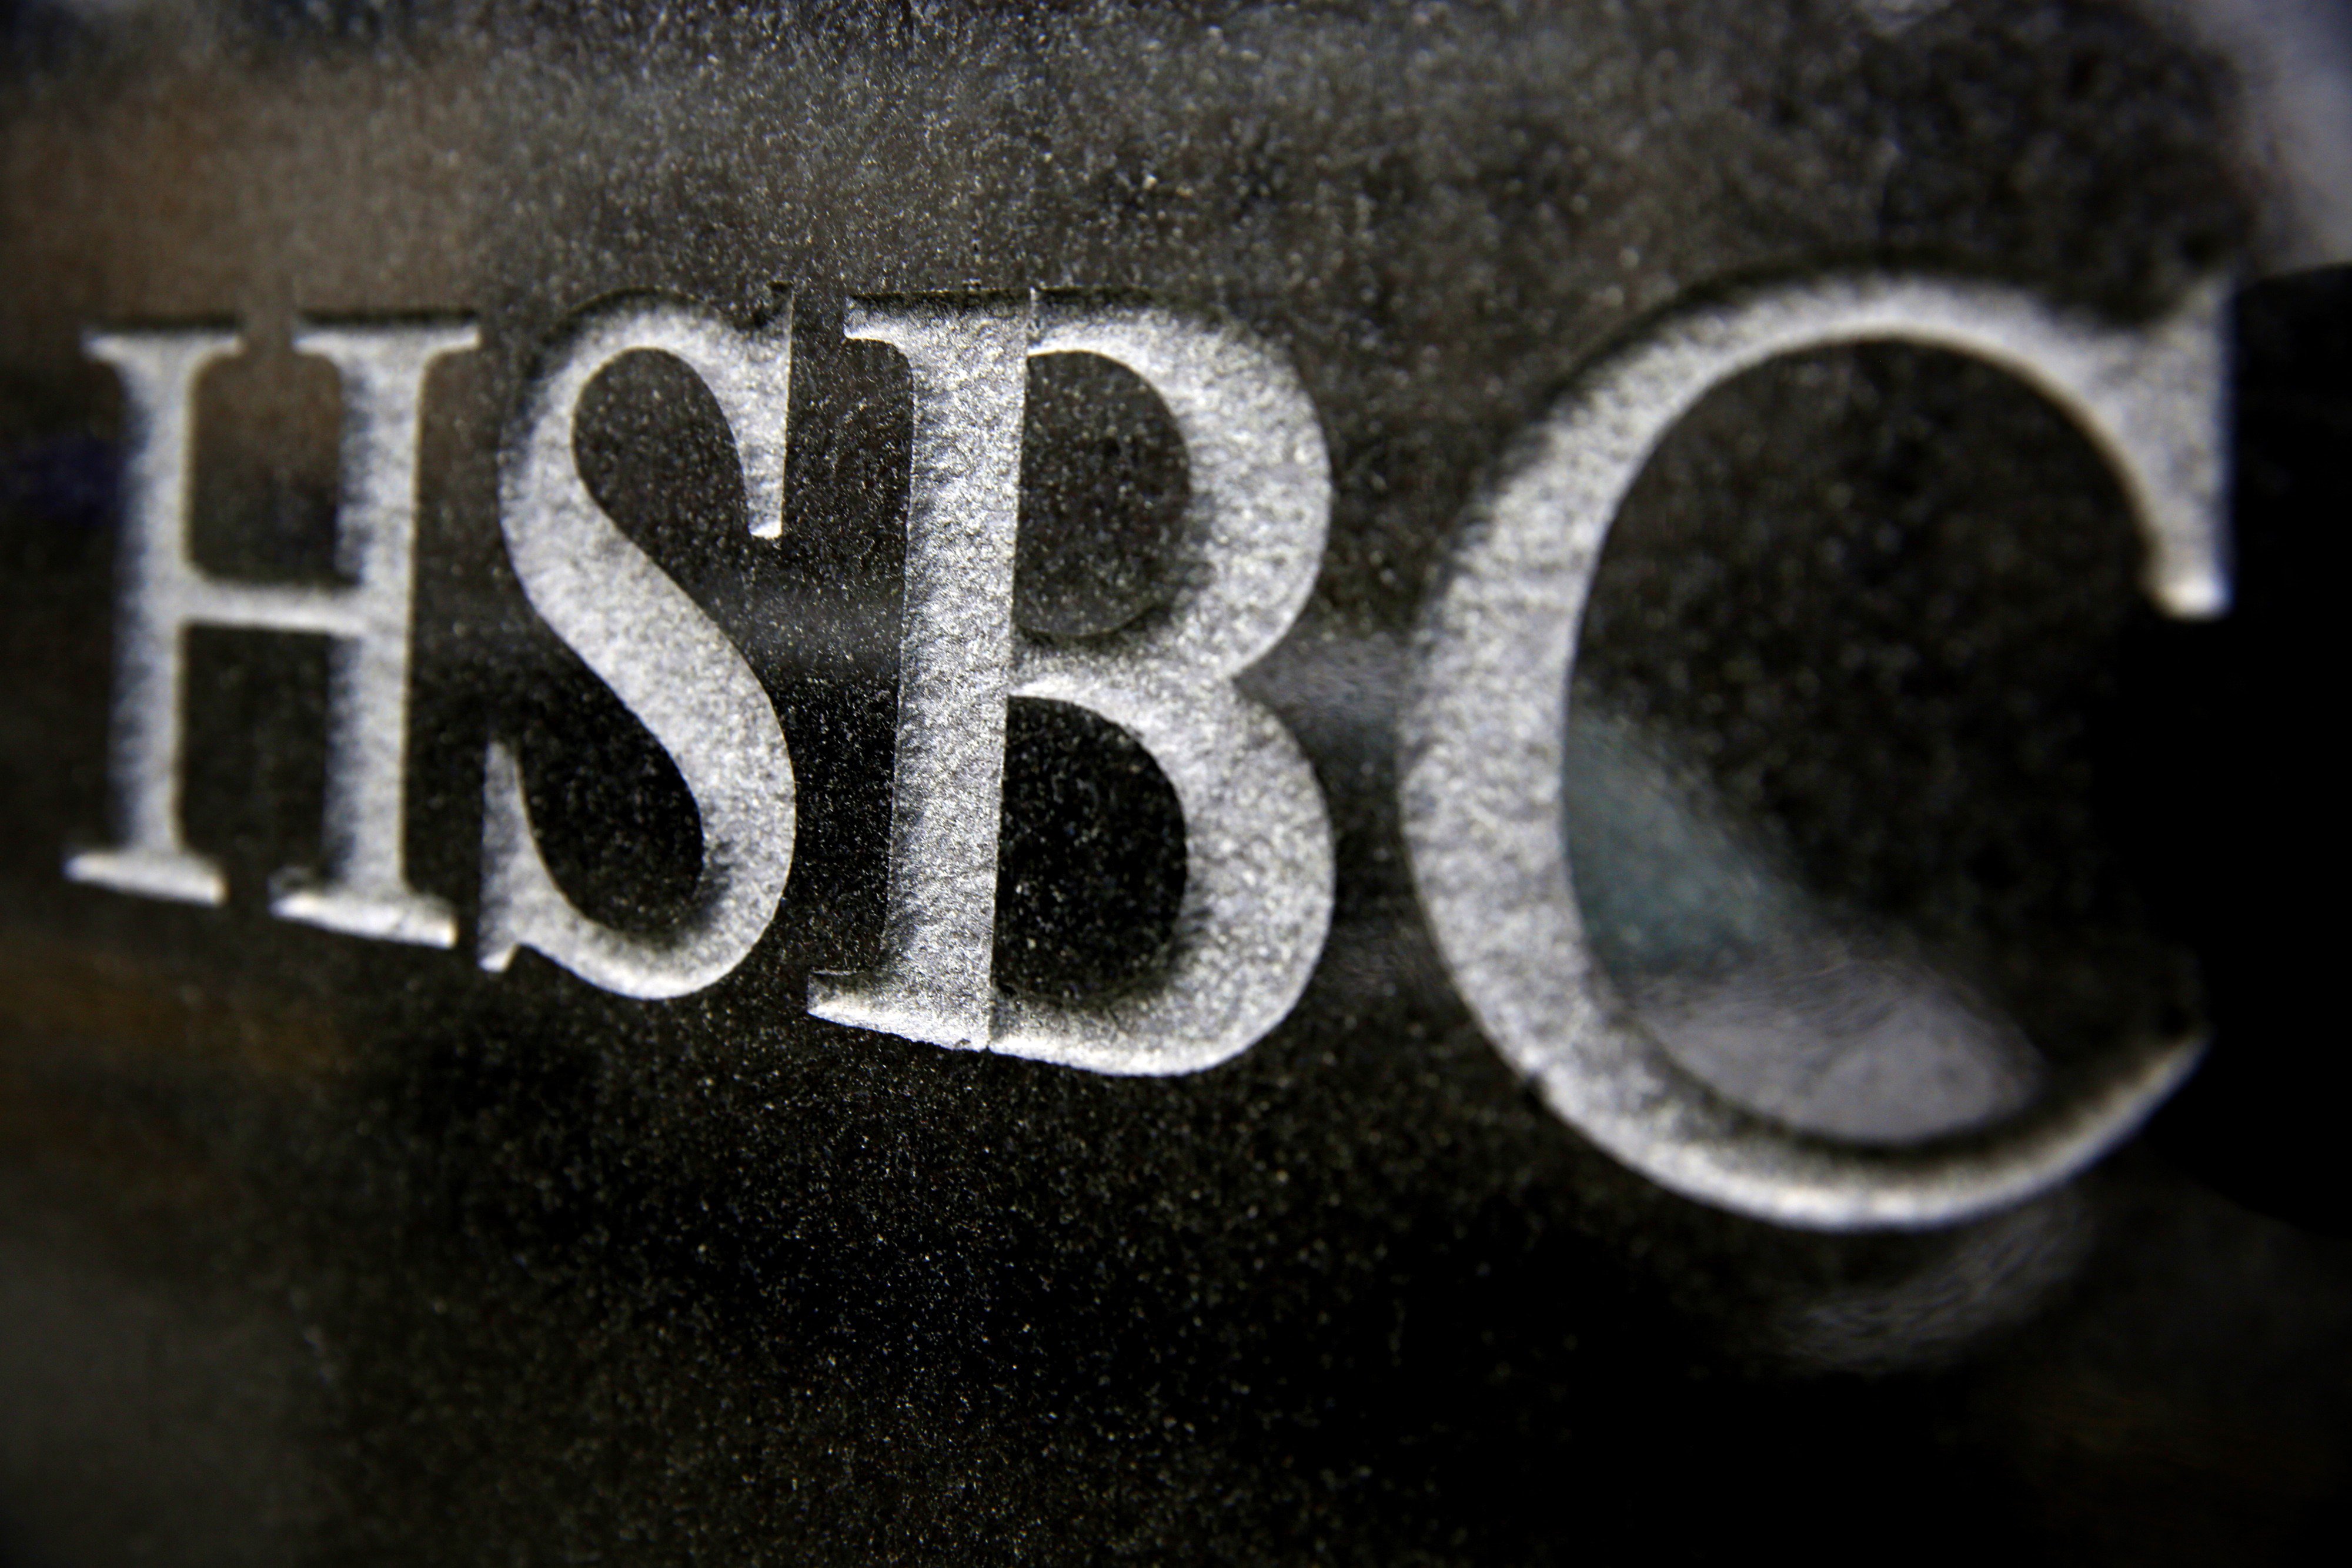 The authors have produced a highly readable, absorbing and relatively unvarnished account of HSBC and its emergence as a global bank. Photo: Bloomberg